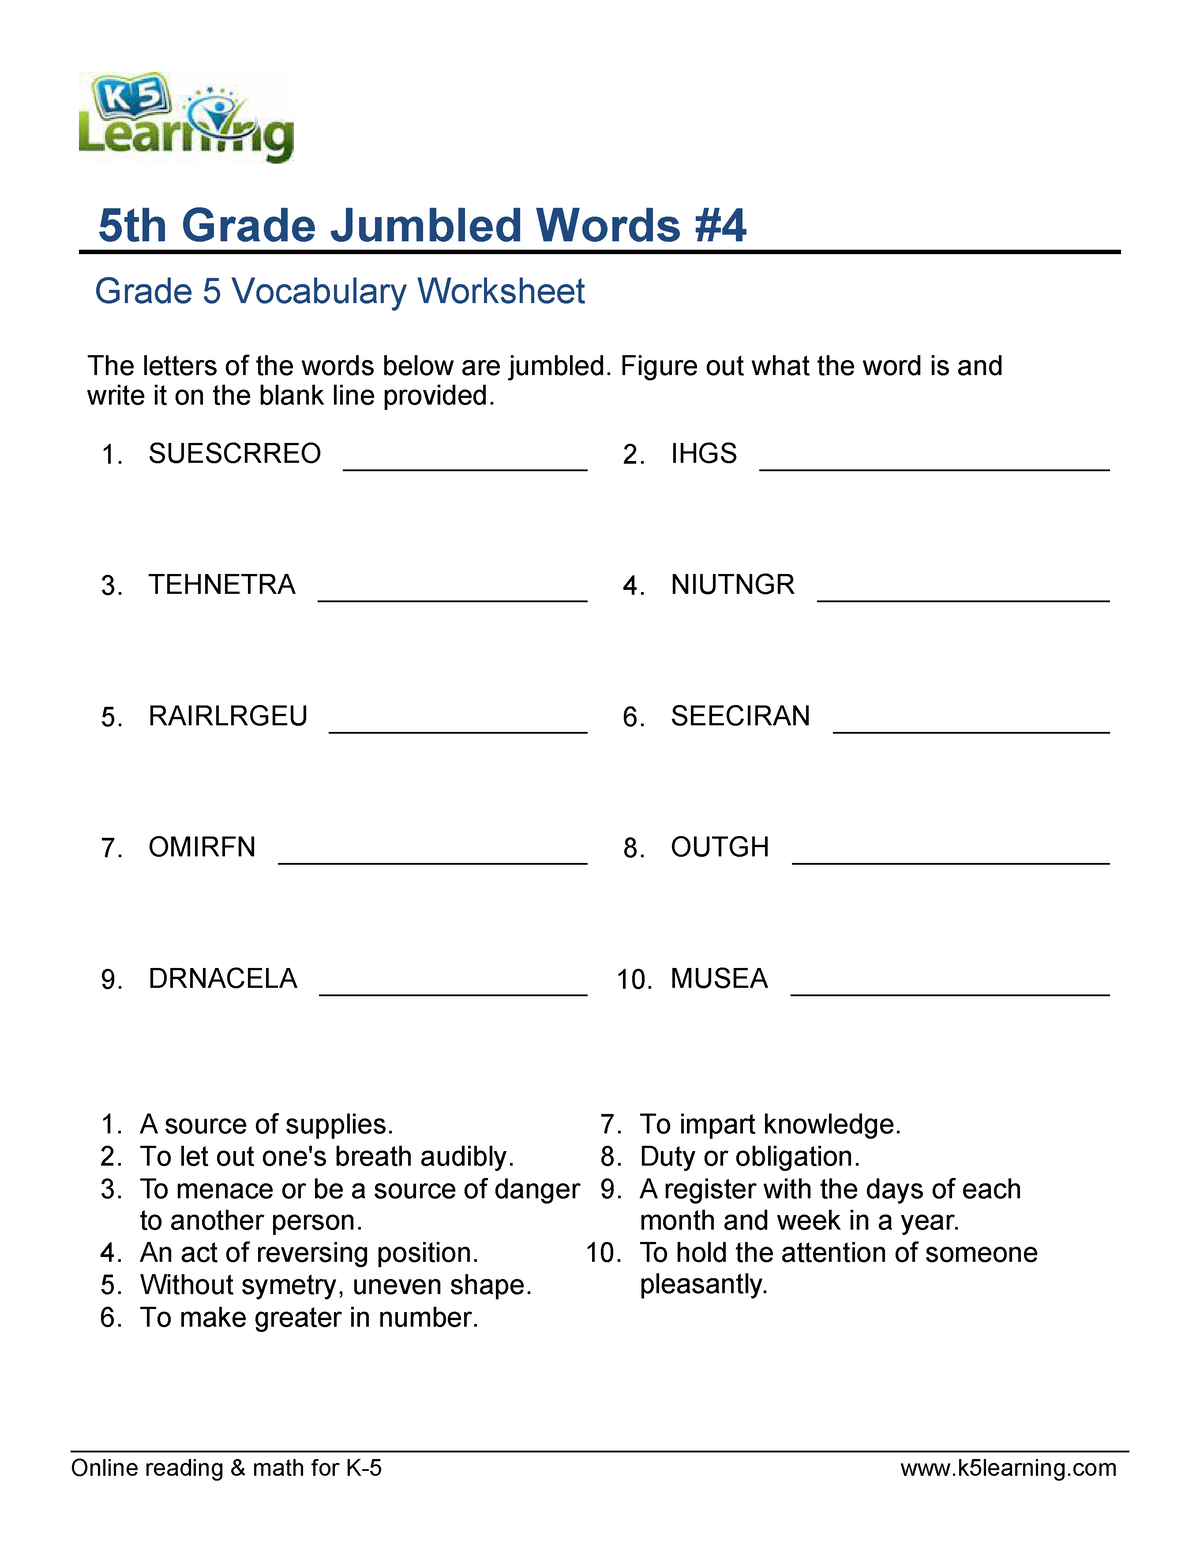 english-for-5th-grade-jumbled-words-4-online-reading-math-for-k-5-k5learning-5th-grade-studocu